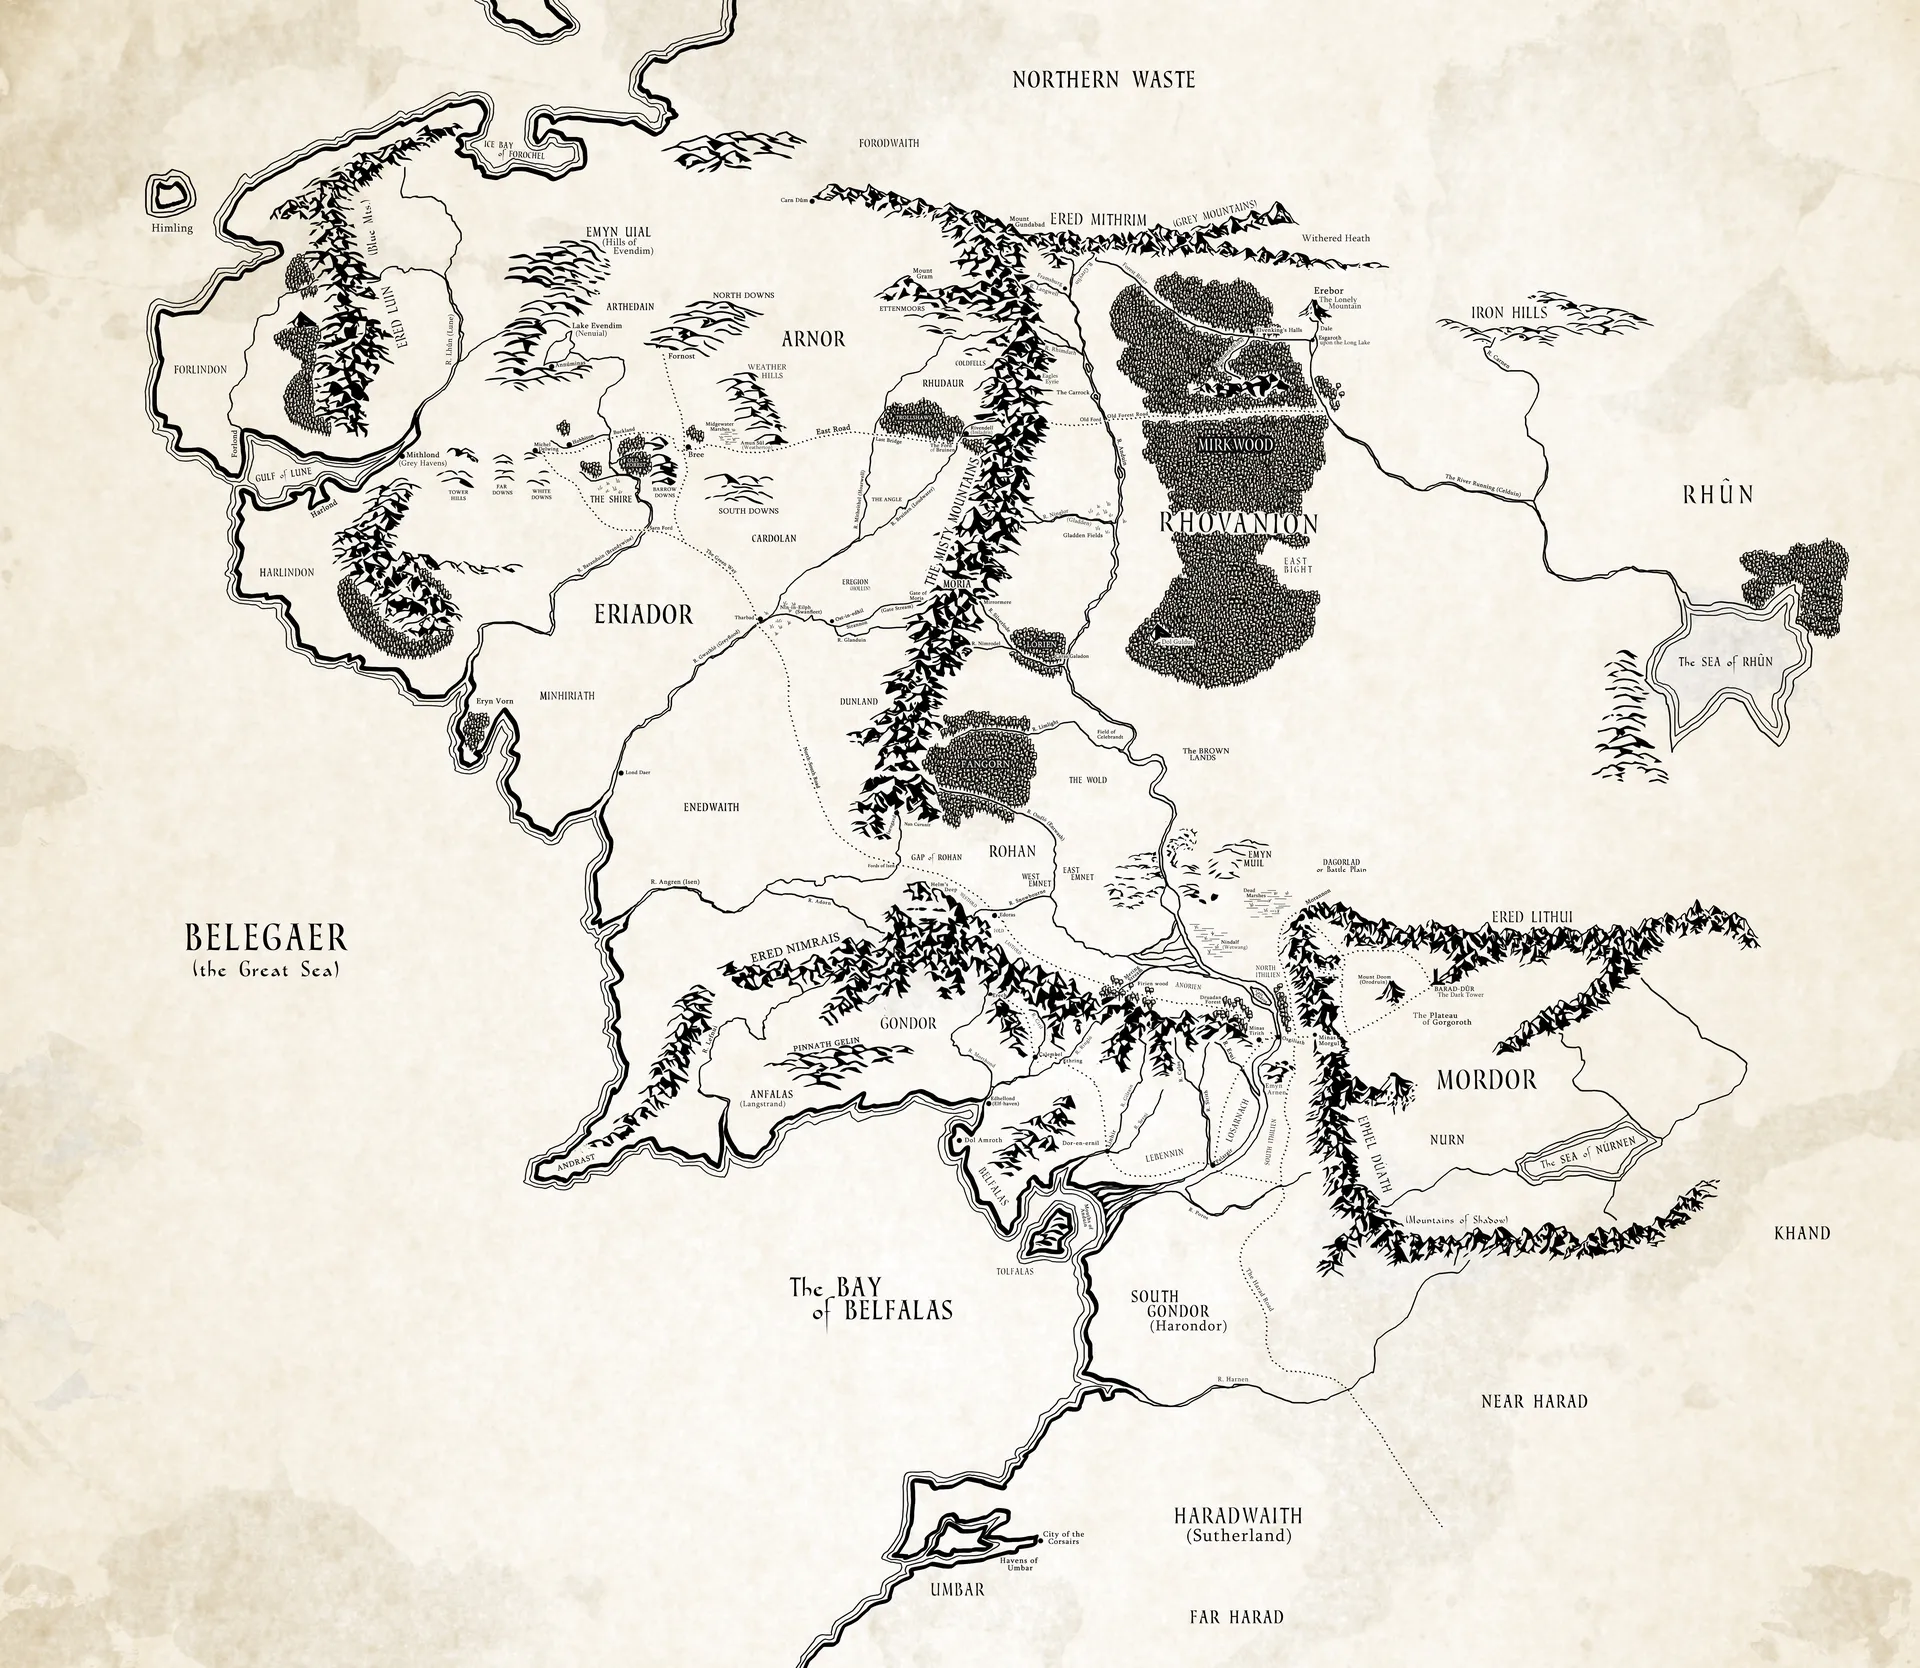 This Lord of the Rings Middle-earth map can help you navigate The Rings of Power